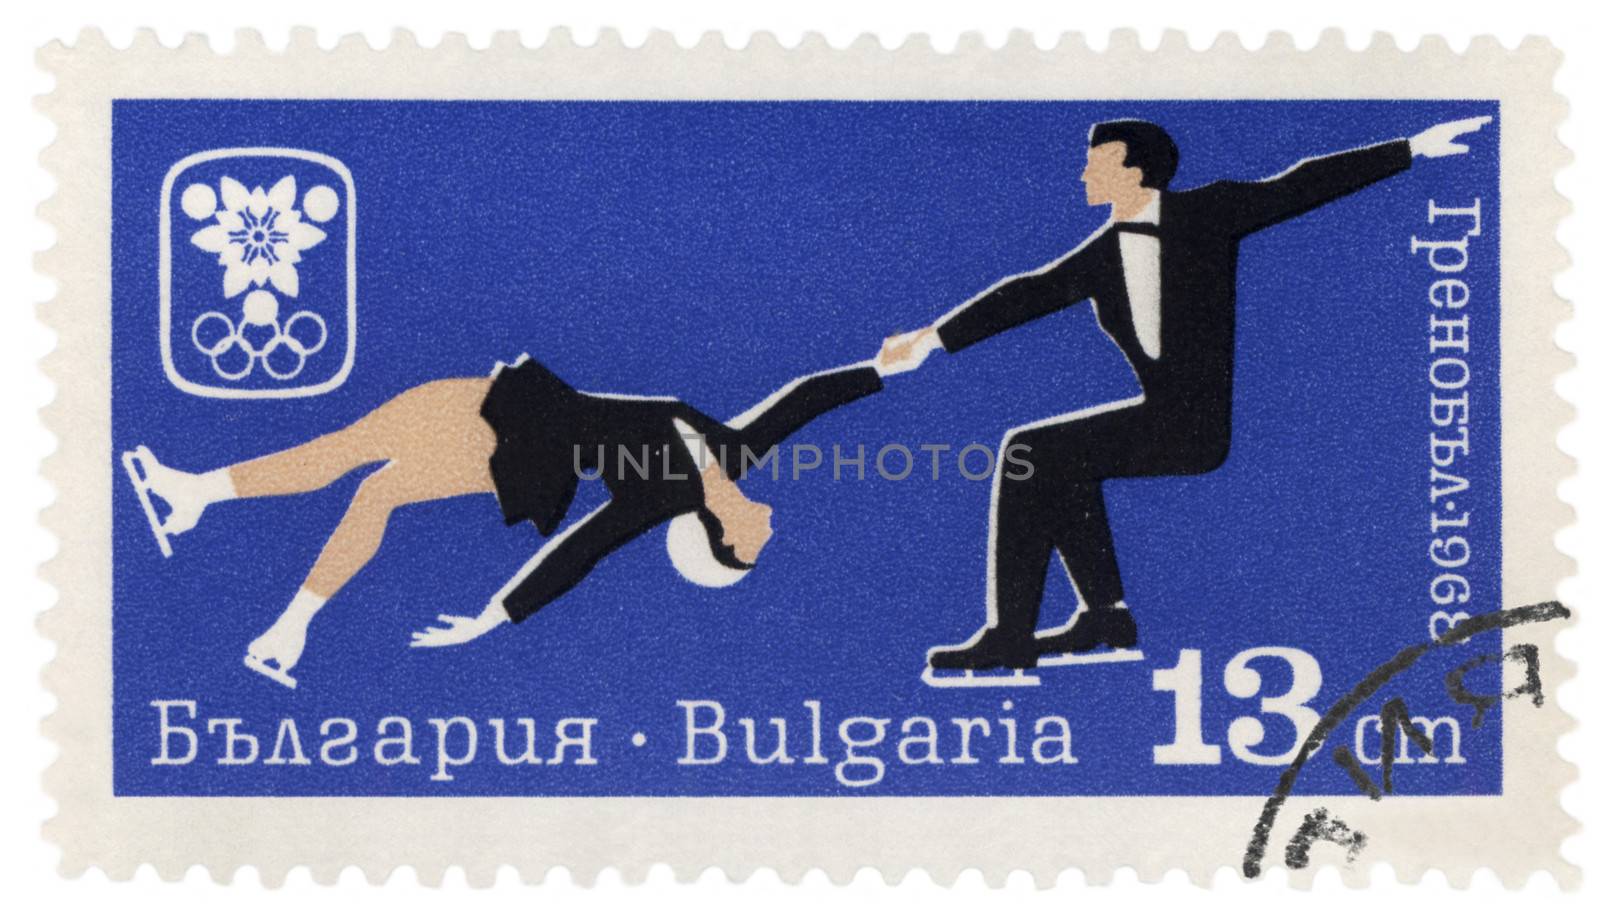 Pairs figure skating on post stamp by wander